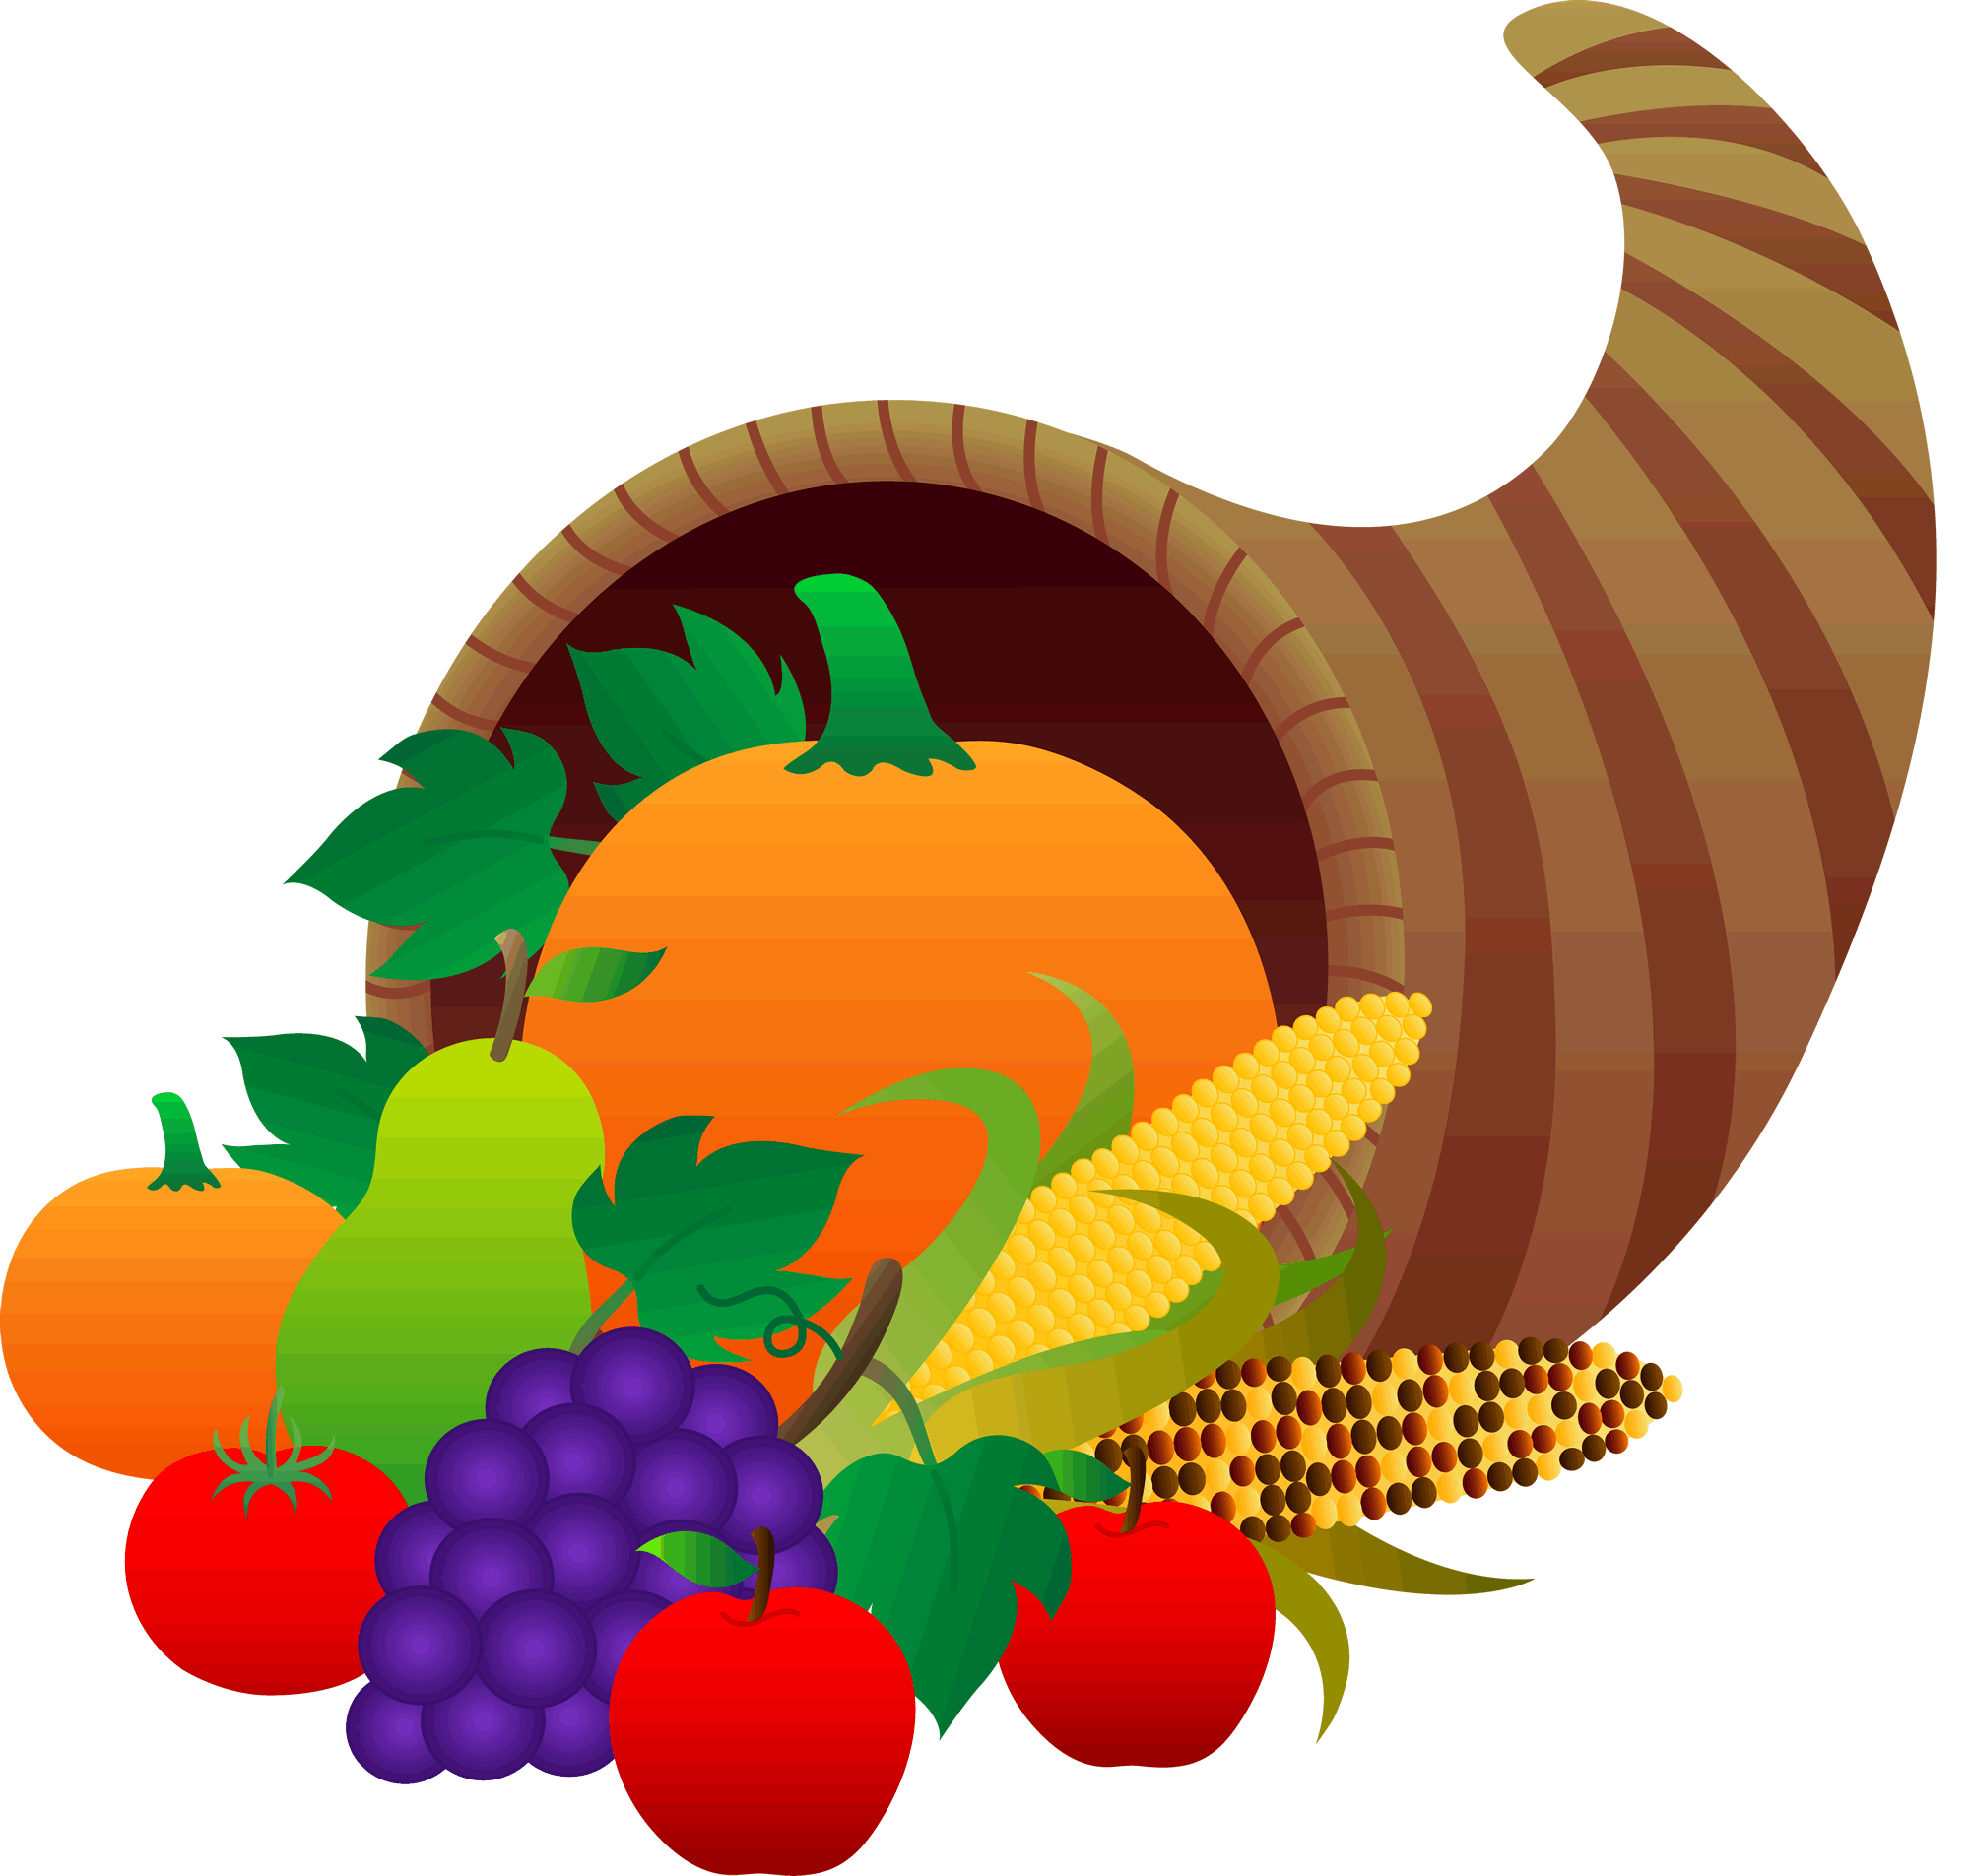 ThanksGiving clipart #6, Download drawings